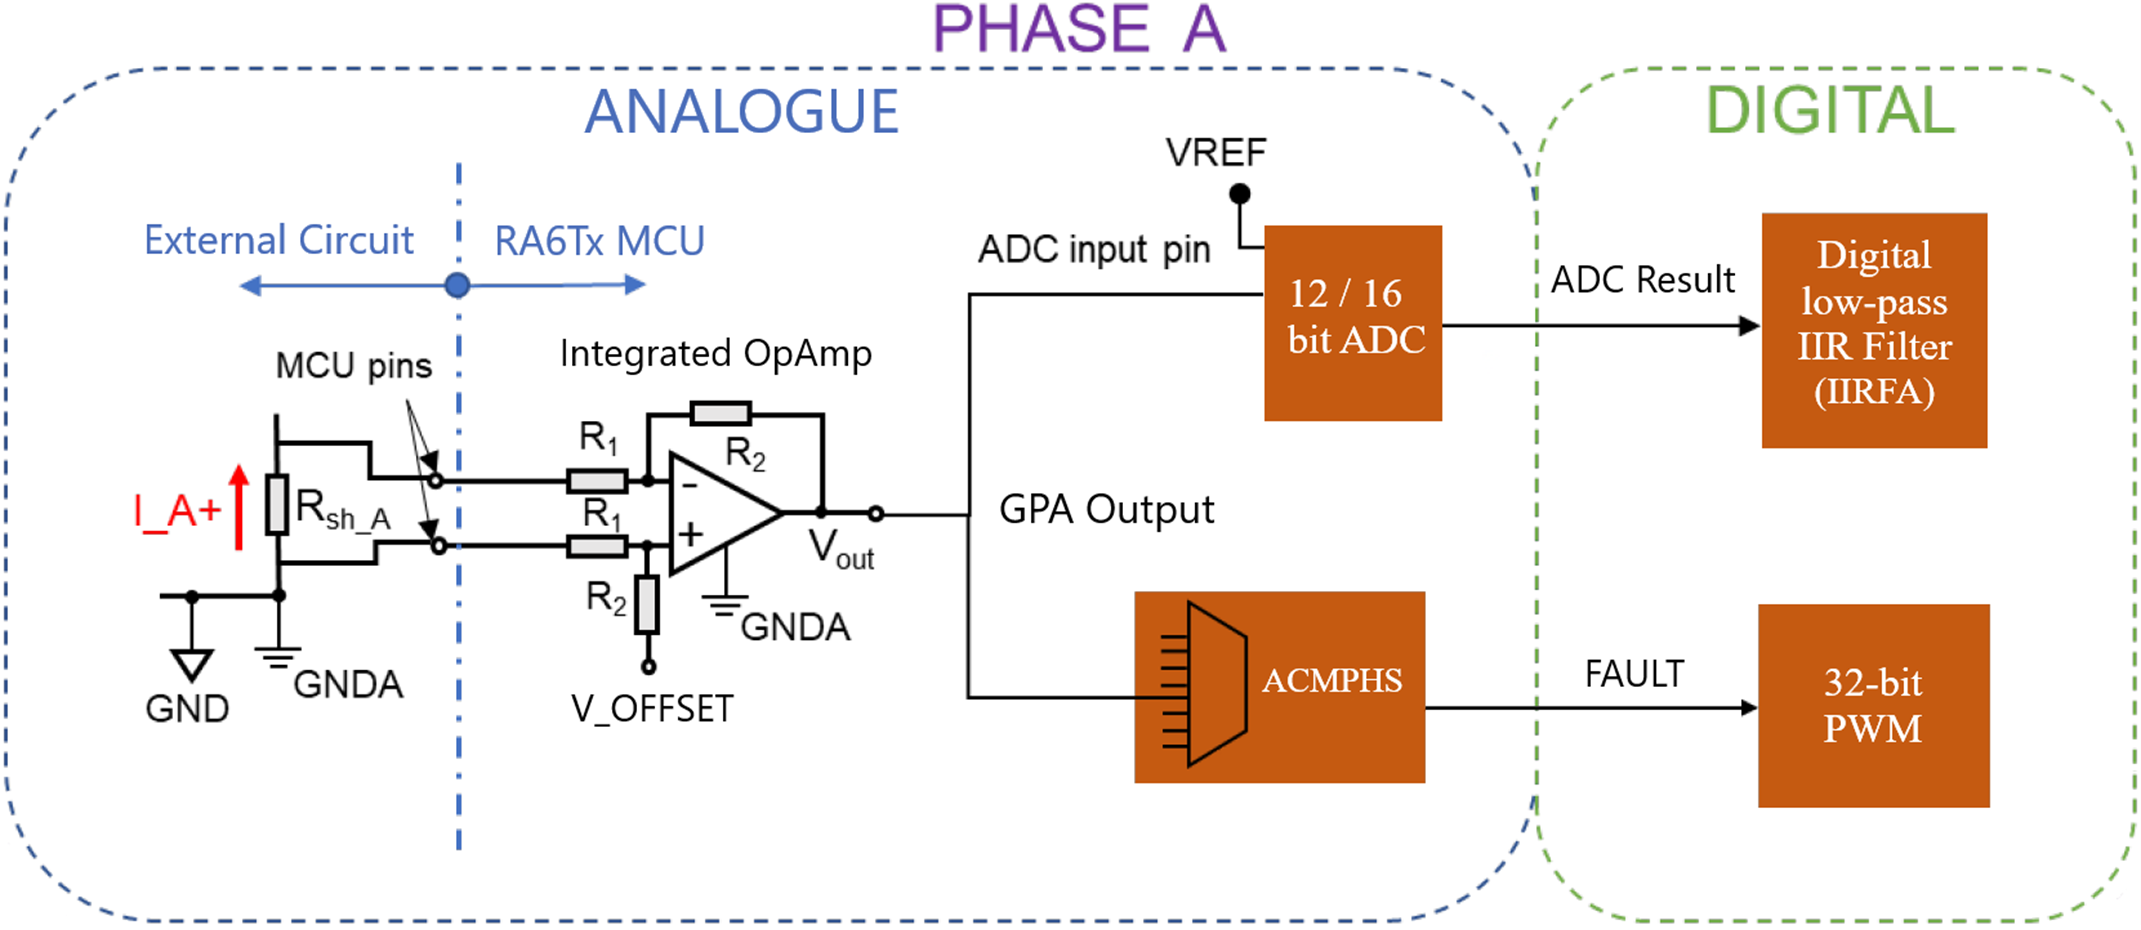 Application of Renesas RA6Tx rich integrated analogue peripherals for a 3-phase BLDC drive (includes phase A only)